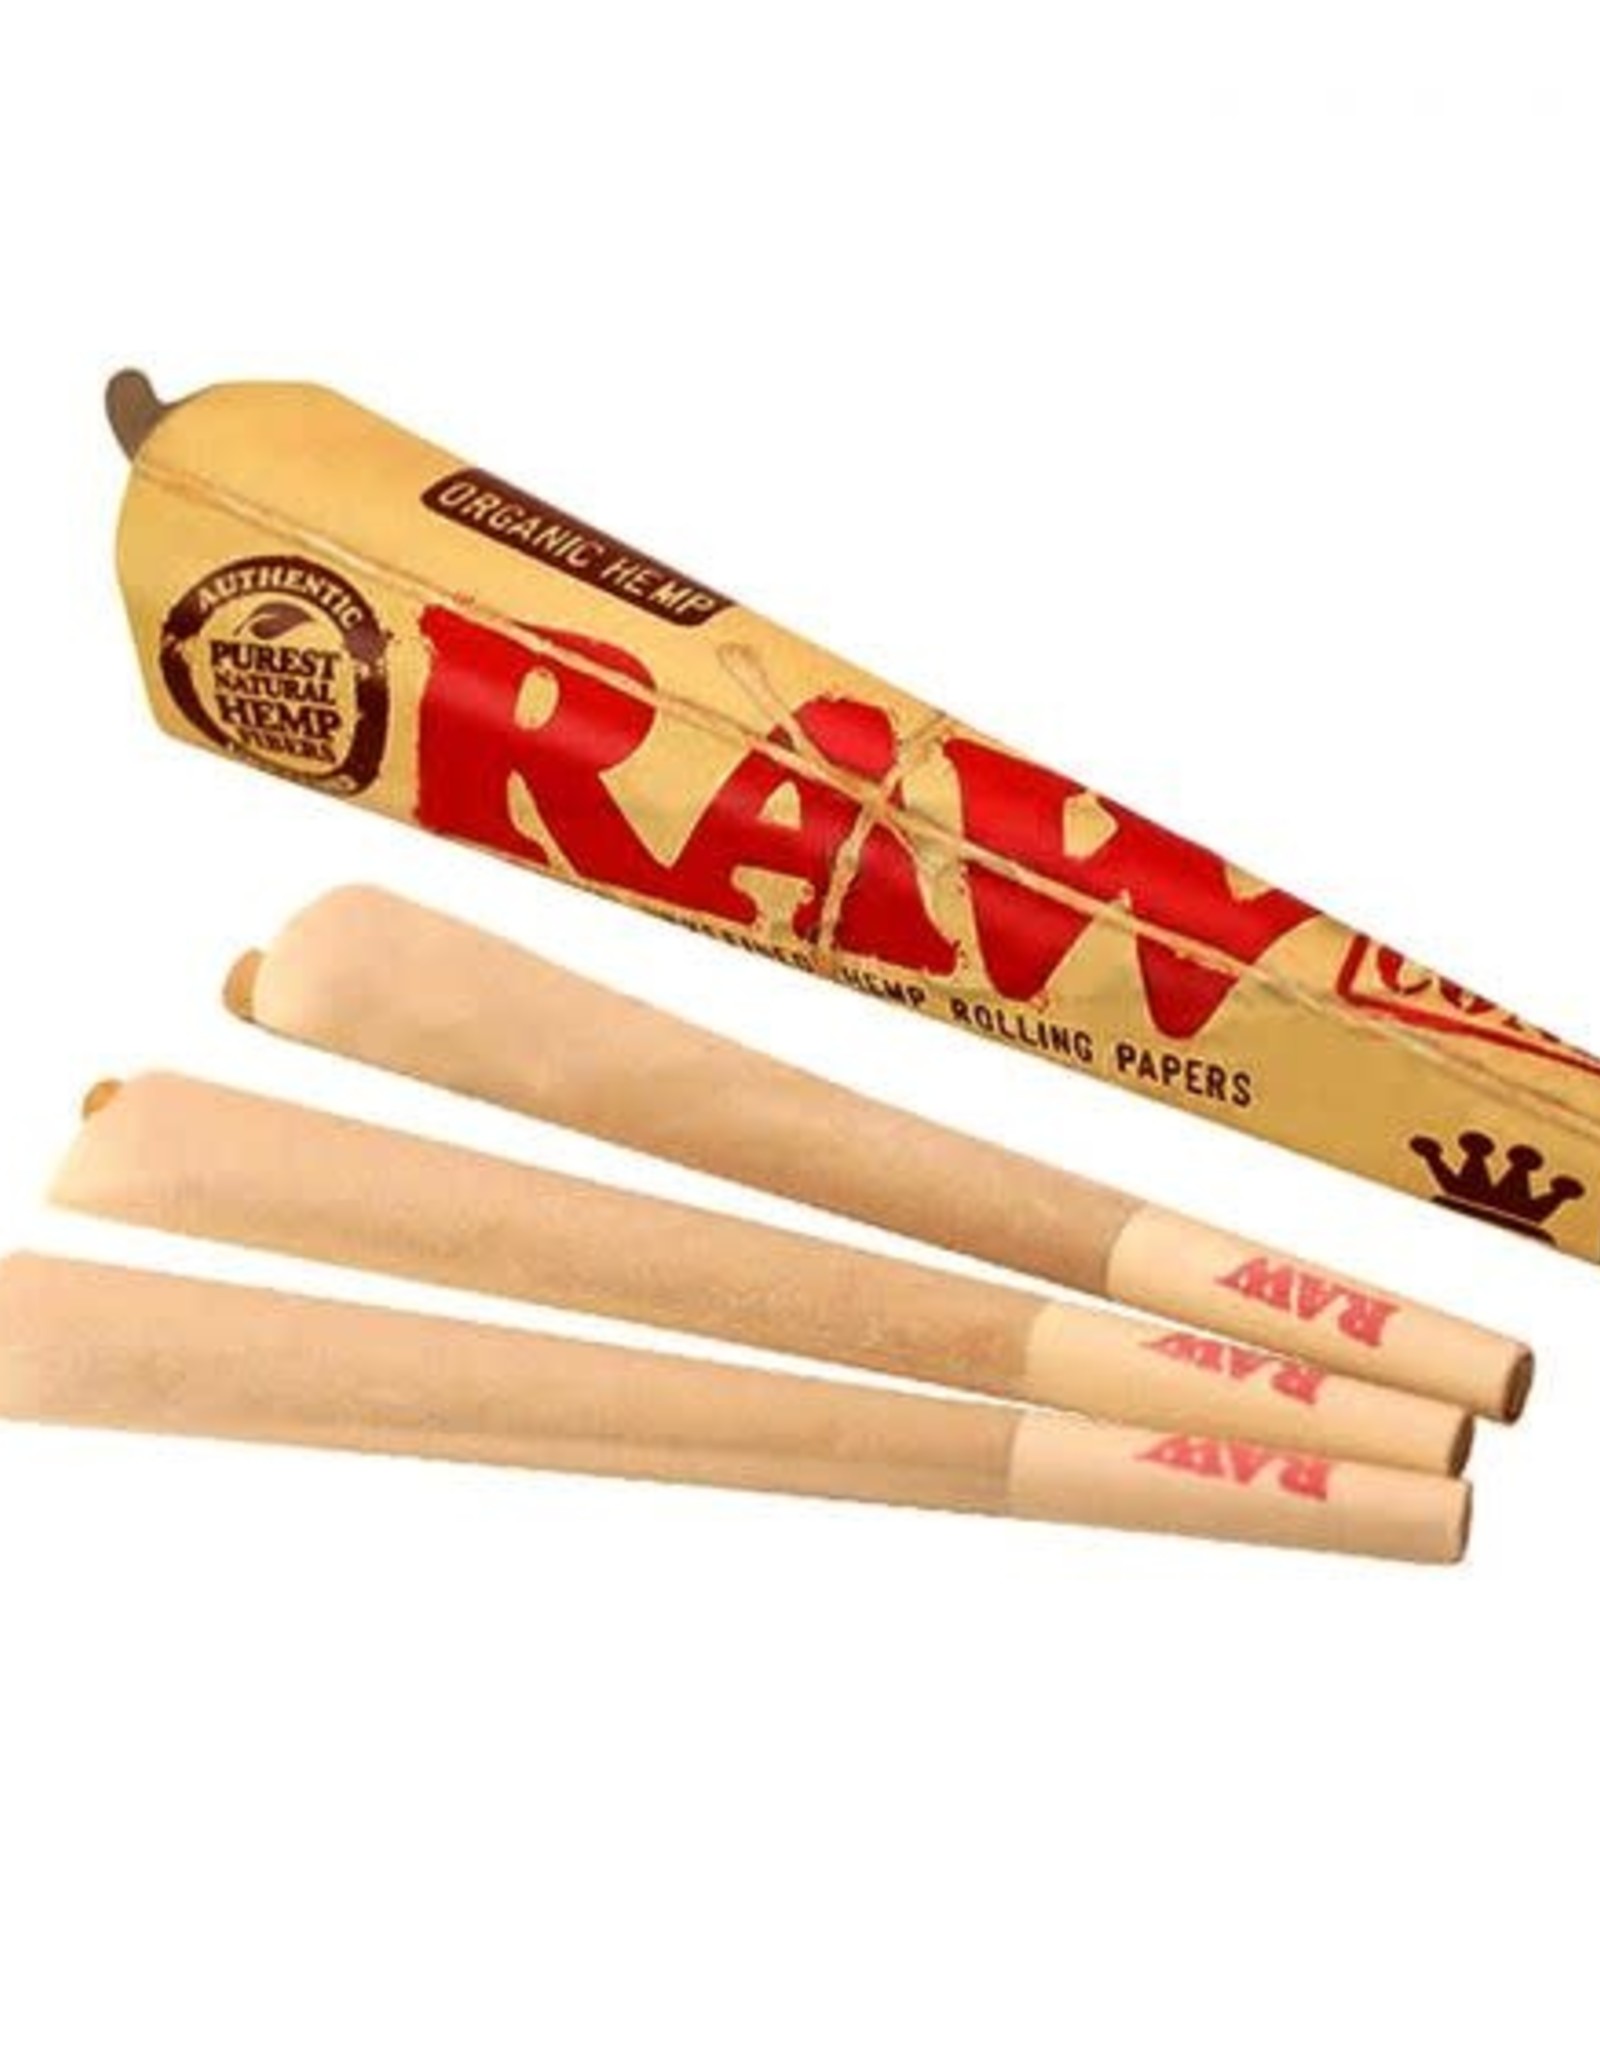 Raw Cones 1 1/4 Size (6 - Pack)